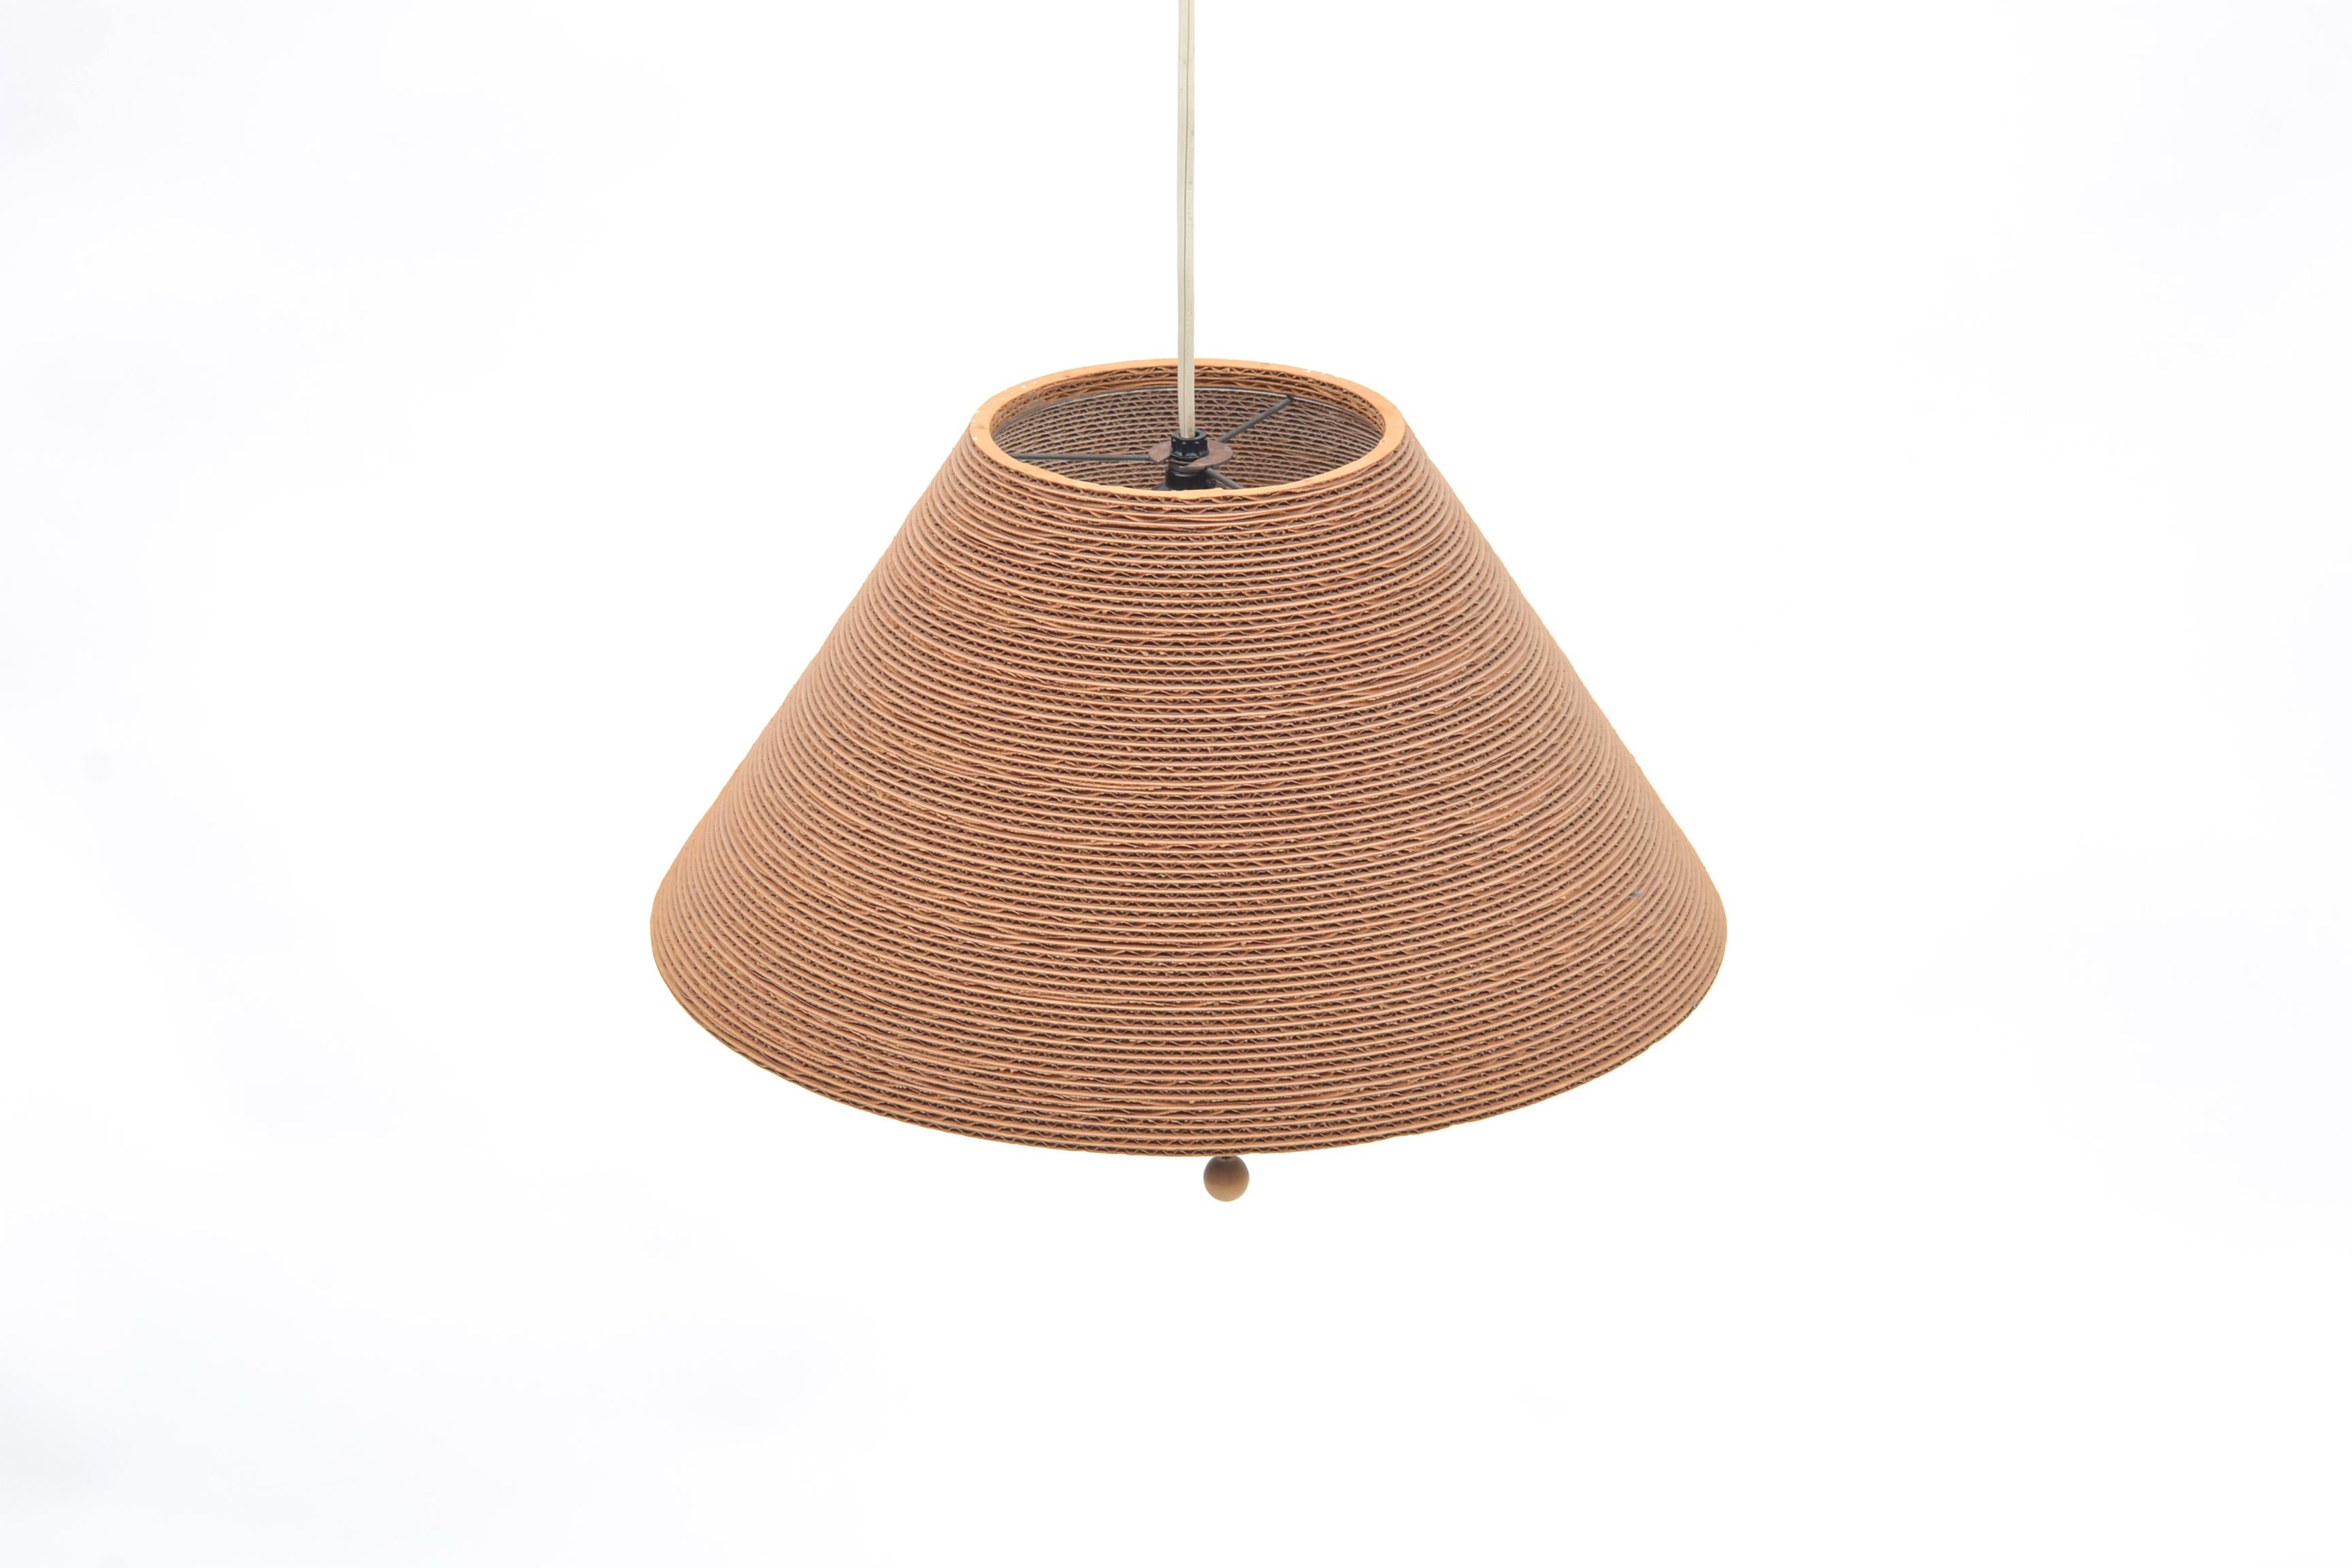 Late 20th Century Gregory Van Pelt Corragated Cardboard Hanging Light For Sale